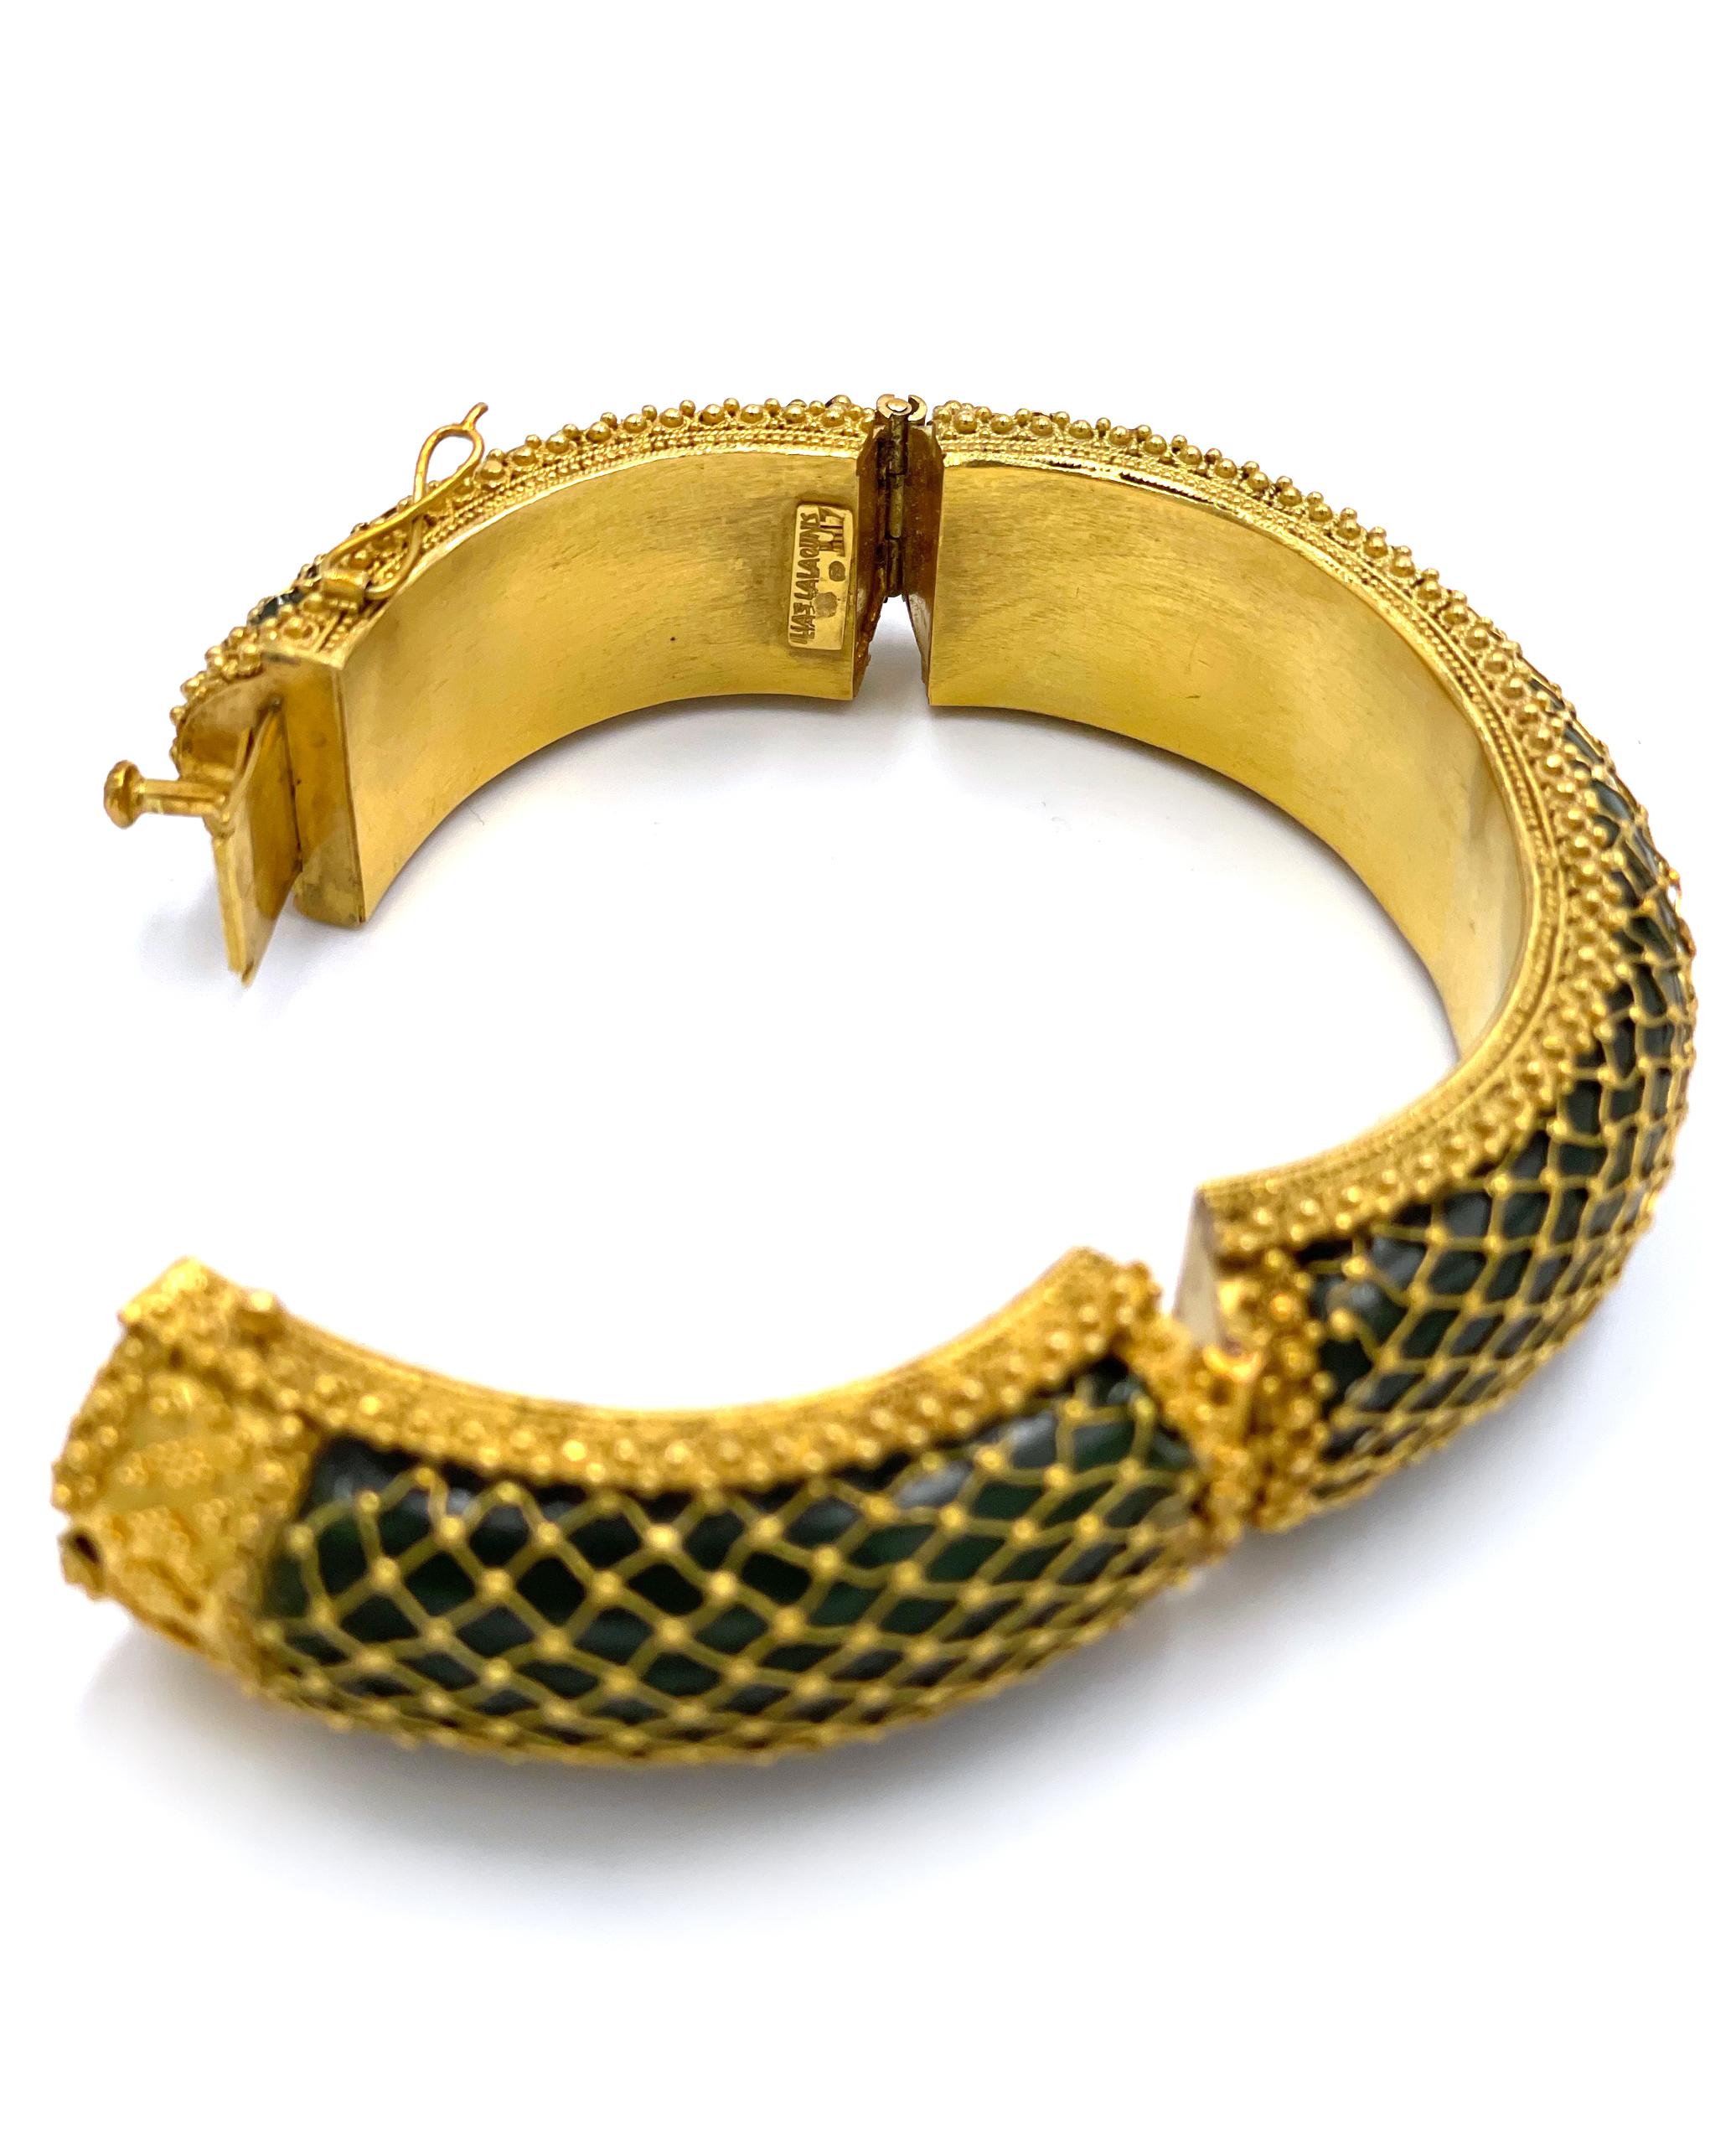 Ilias Lalaounis 18K Bangle with Nephrite Jade In Good Condition For Sale In Old Tappan, NJ